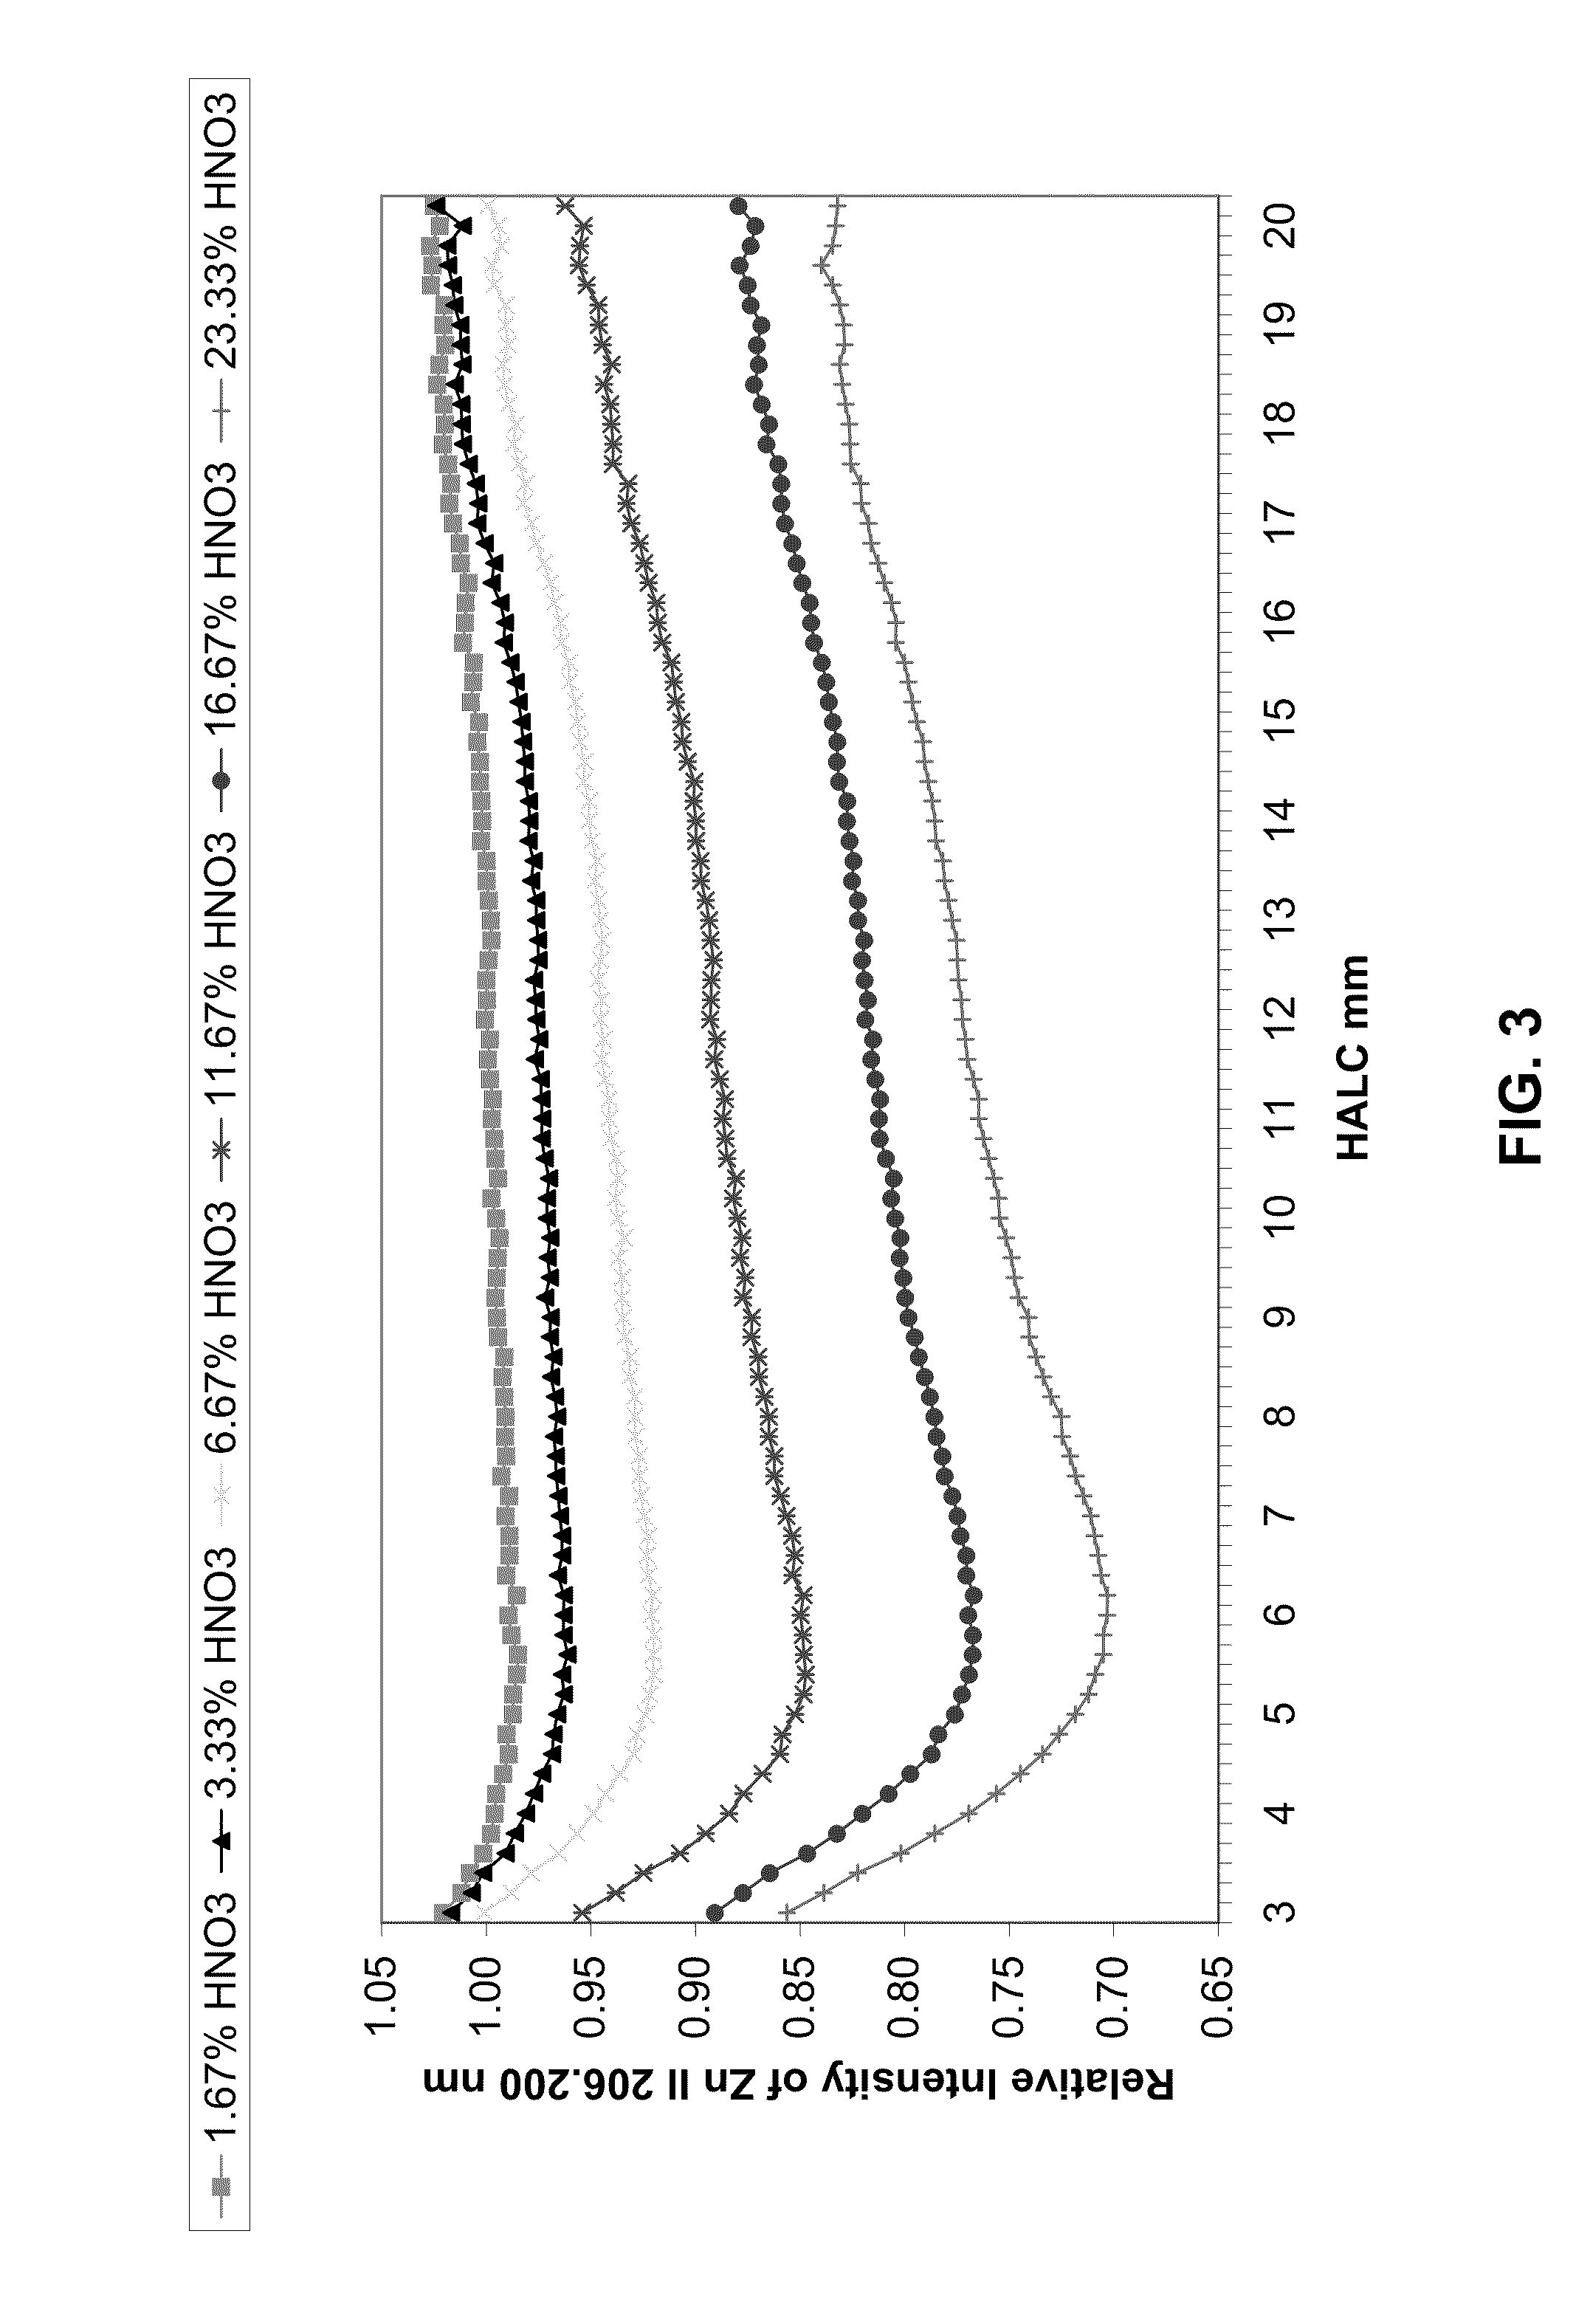 Methods for detecting and correcting inaccurate results in inductively coupled plasma-atomic emission spectrometry